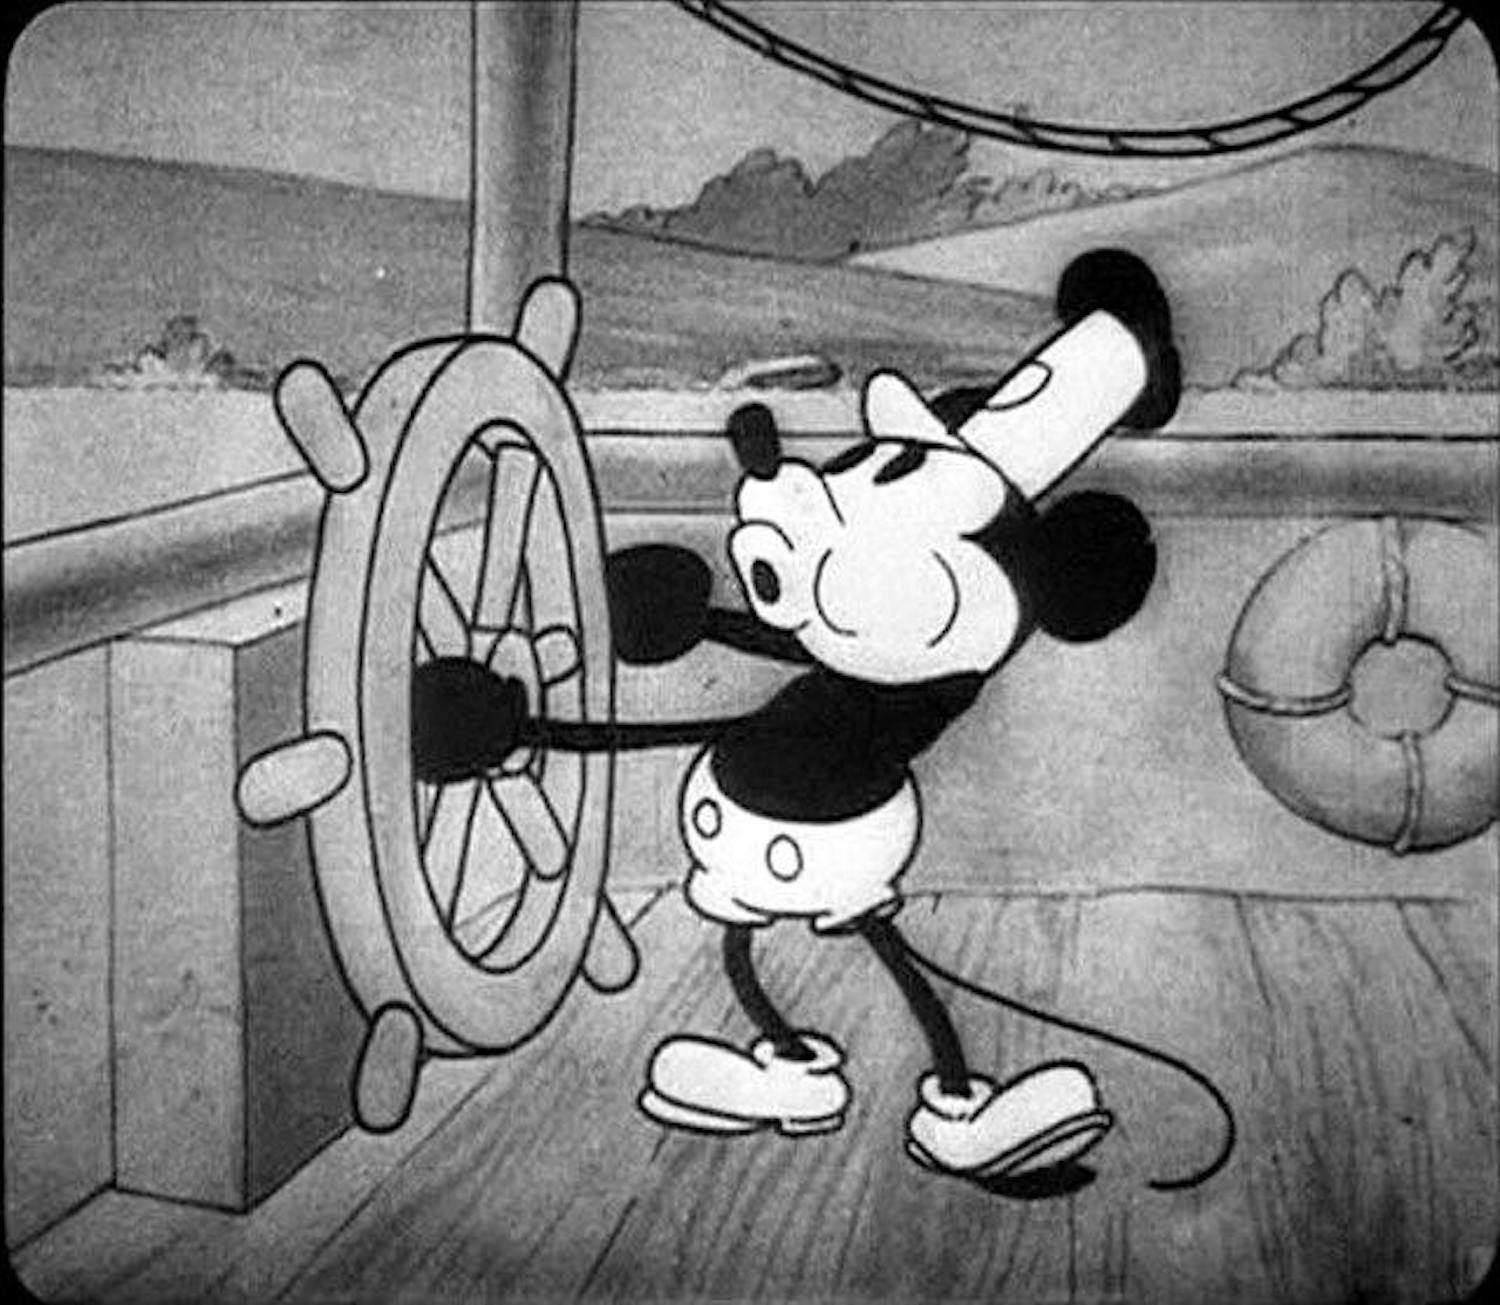 Mickey_Mouse_-_Steamboat_Willie_(1928).jpg